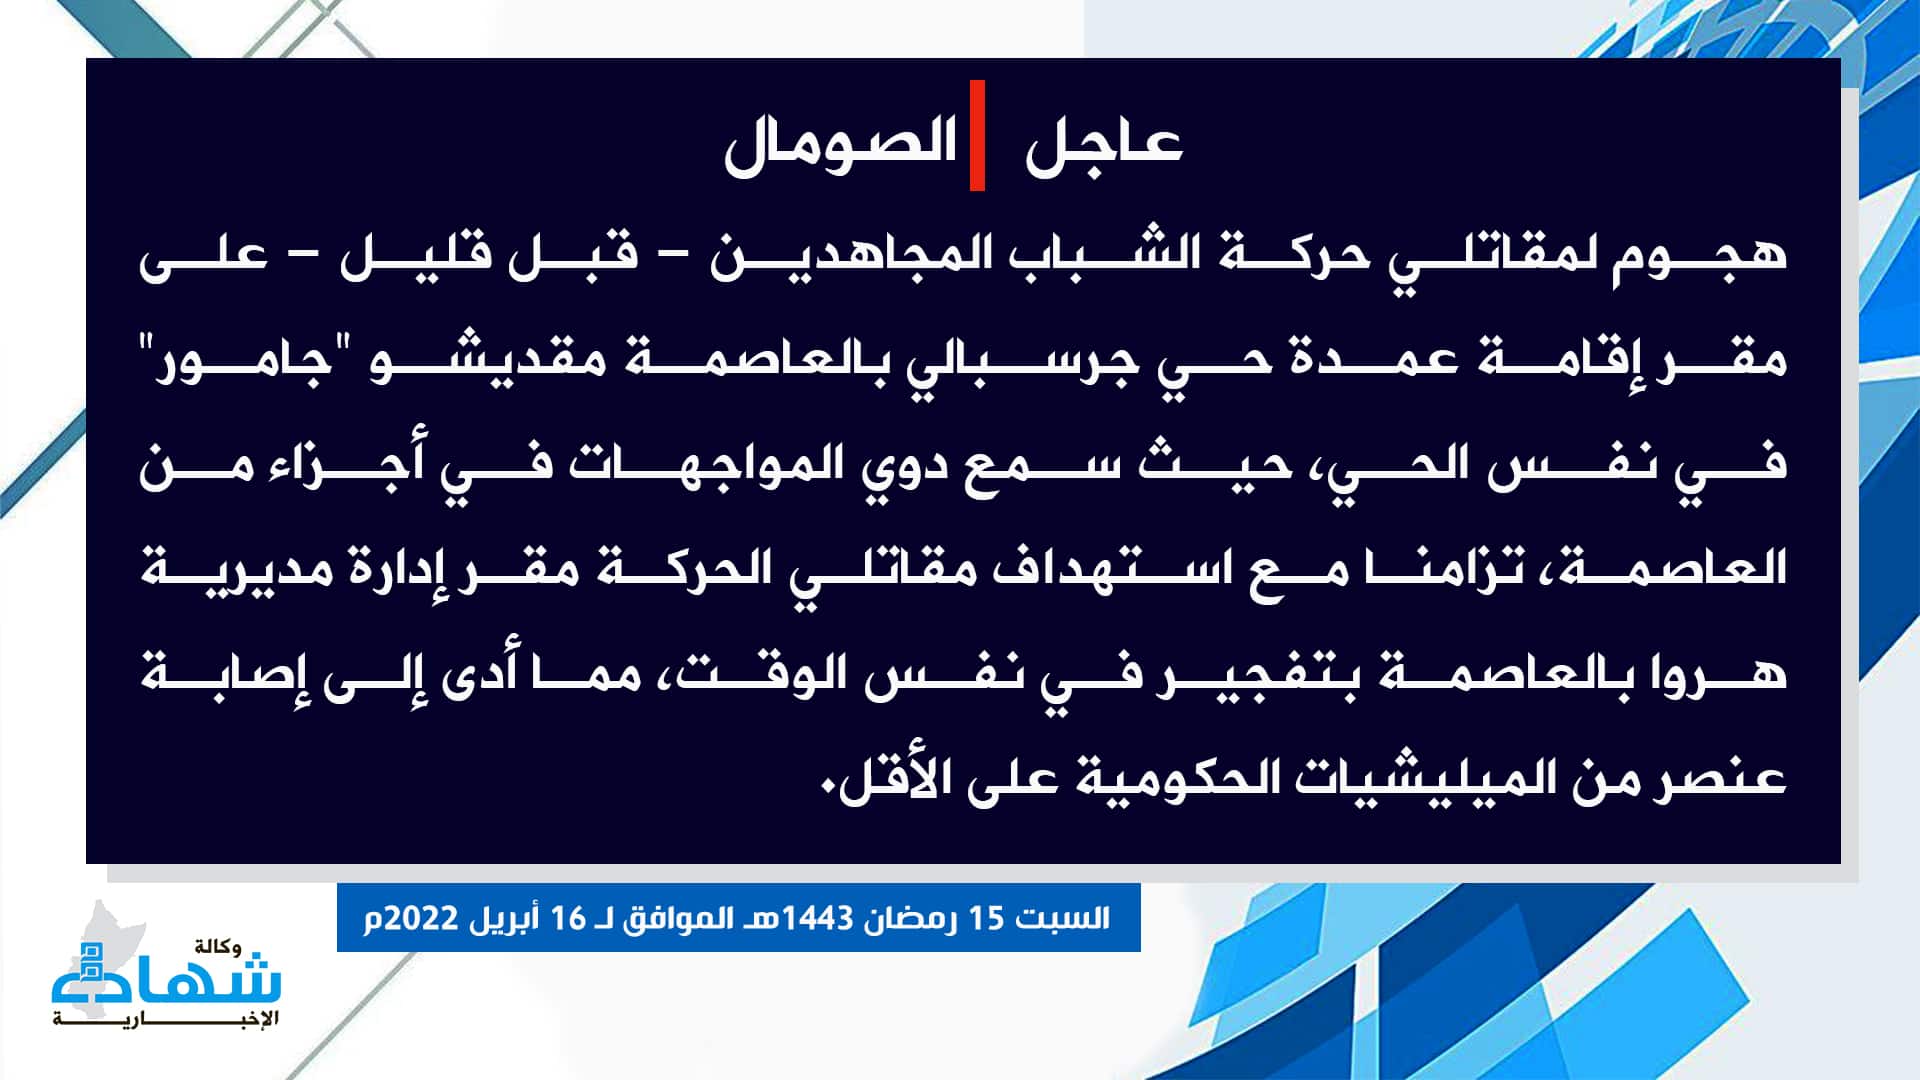 (Claim) al-Shabaab: Mujahideen Attacked the Residence of the Mayor of Garisbali District and Attacked Harewa District Administration by an IED in Mogadishu, Somalia - 16 April 2022